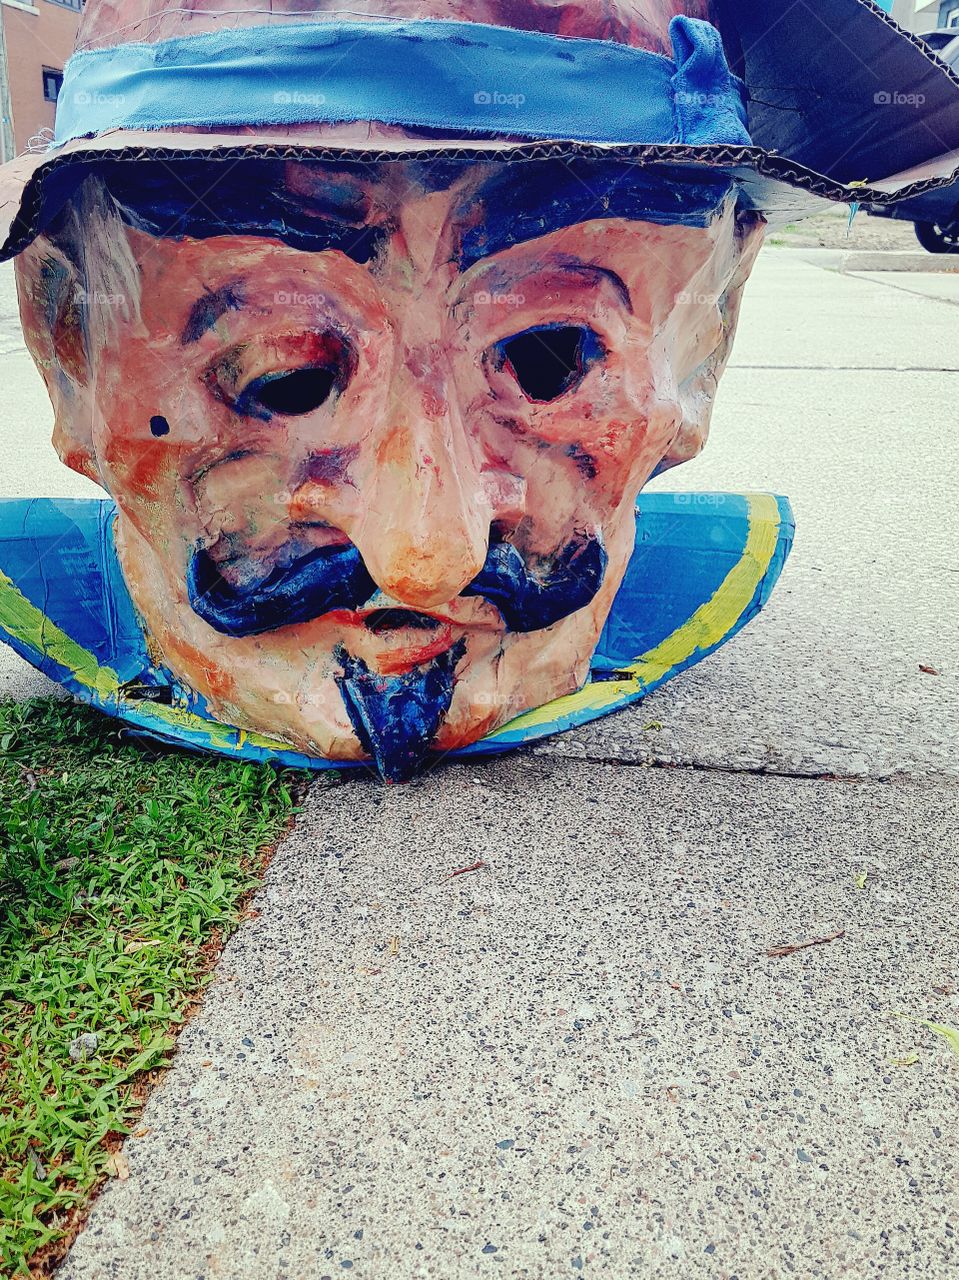 A discarded paper mache head of a man that was put to the curb.